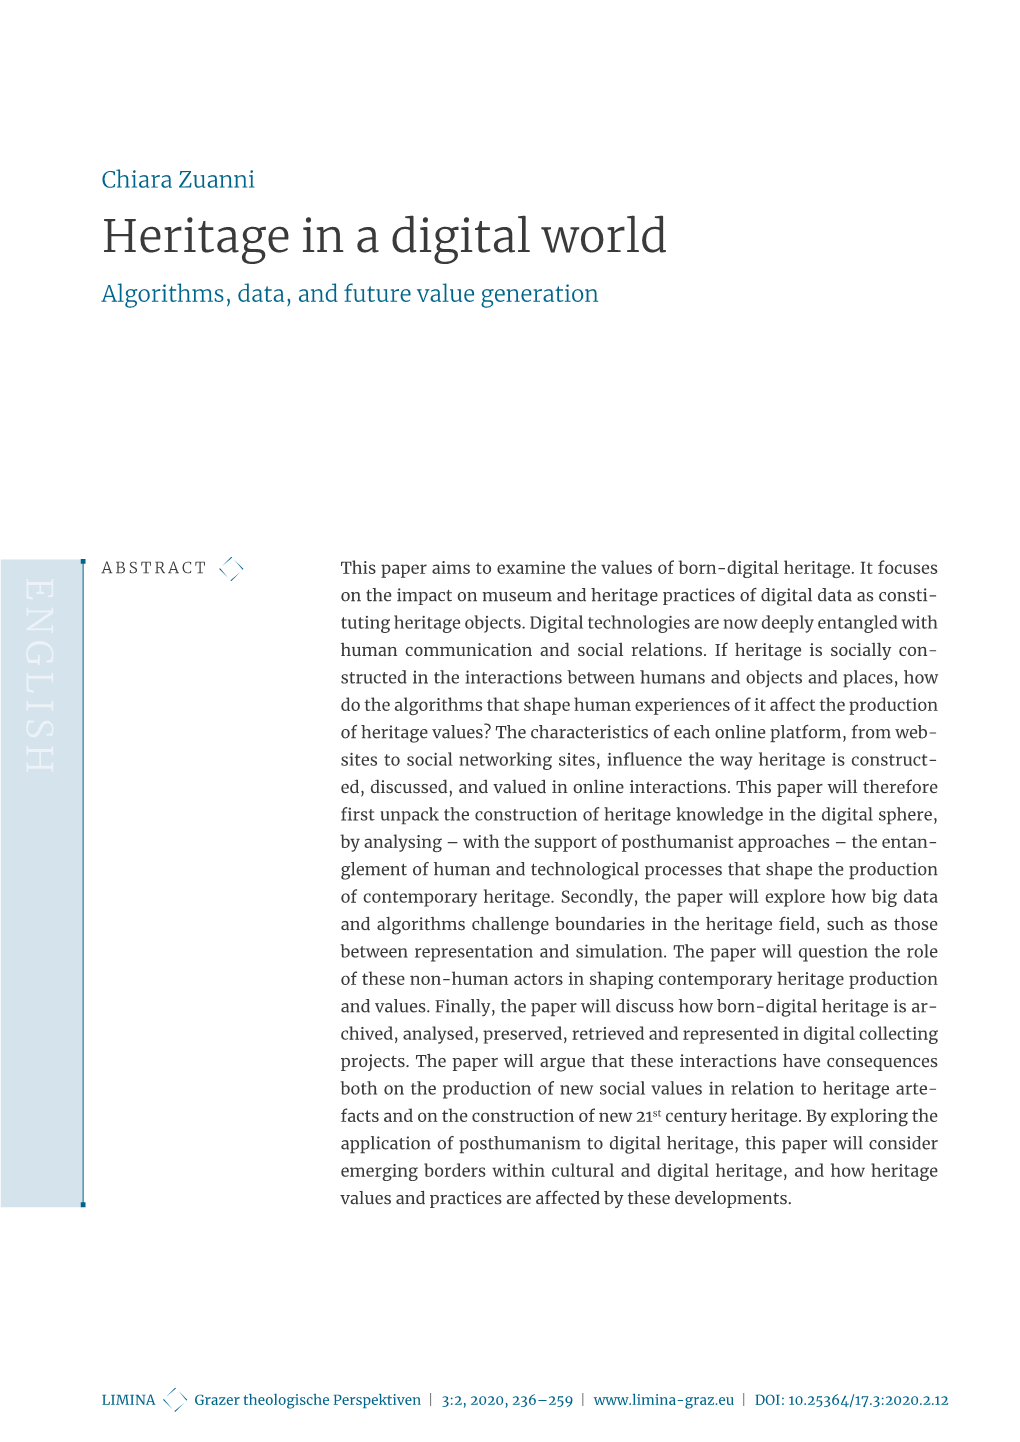 Heritage in a Digital World Algorithms, Data, and Future Value Generation